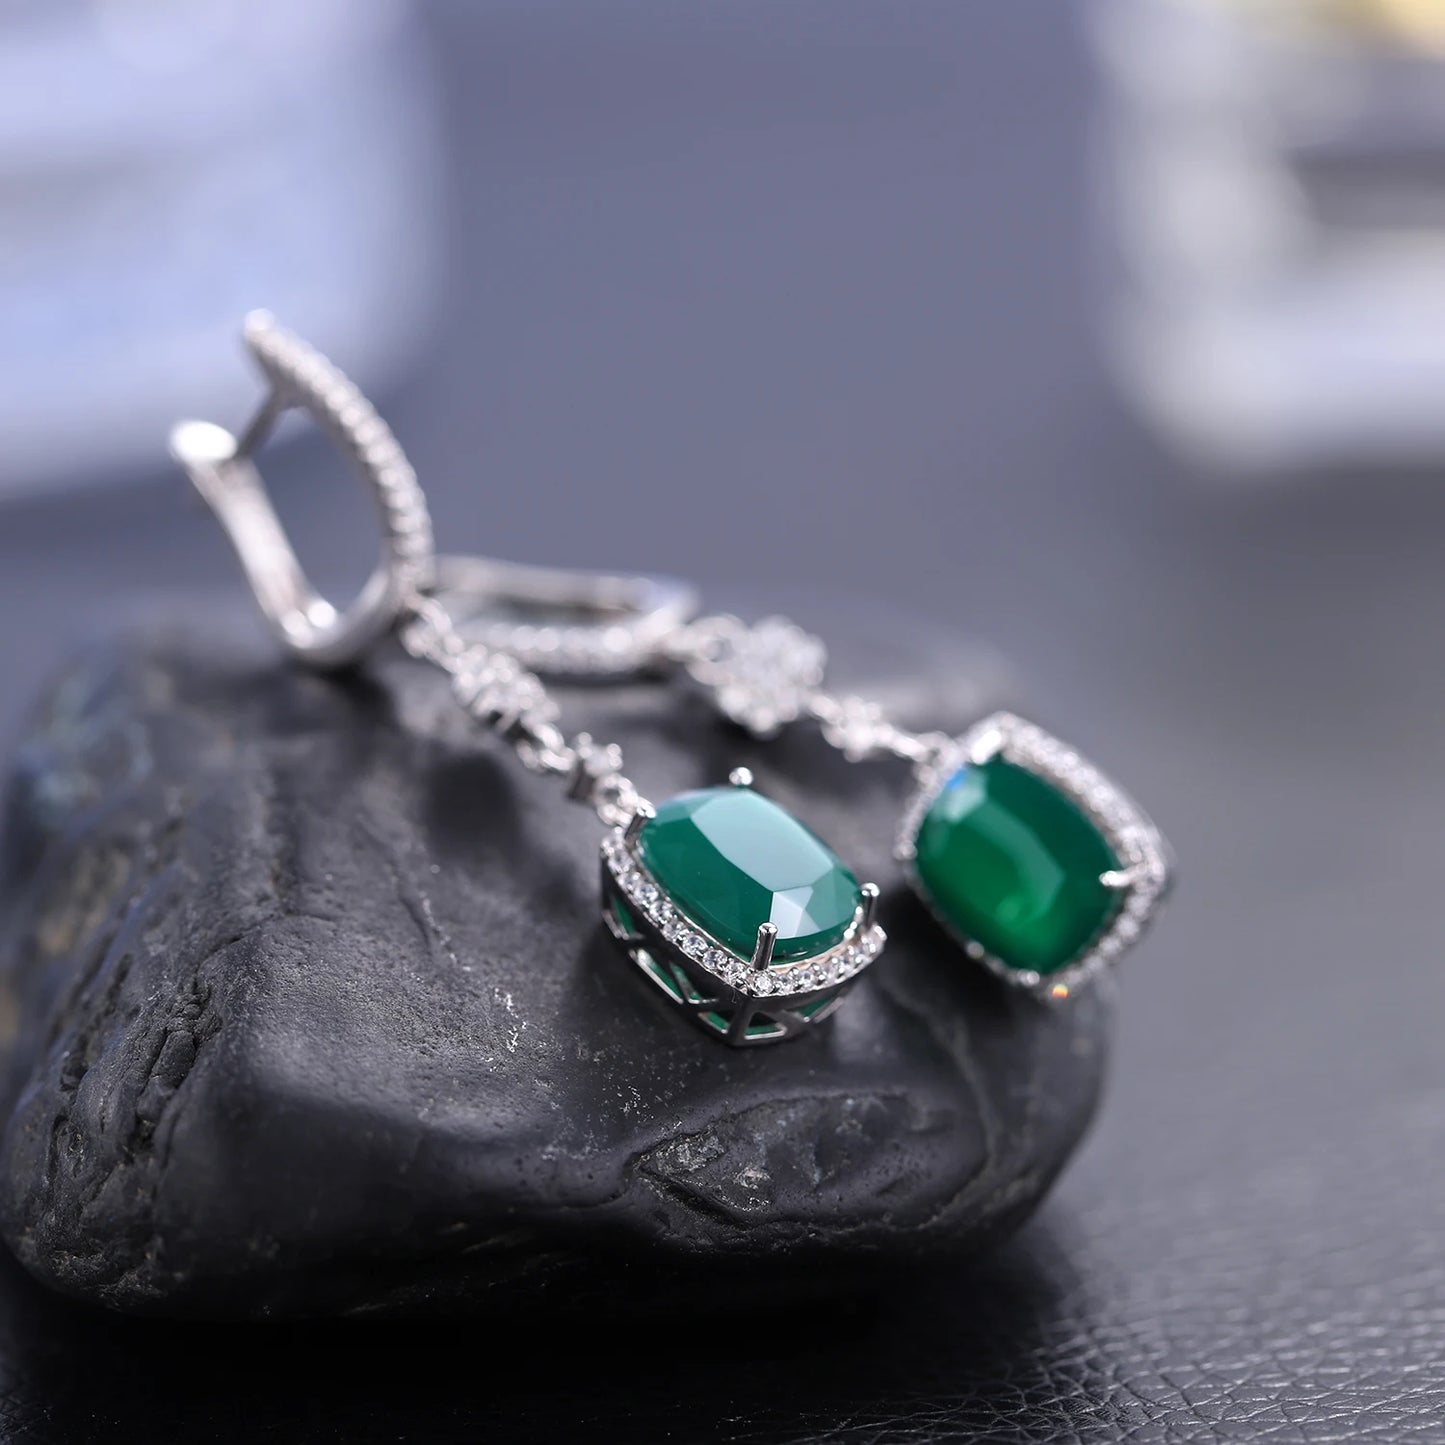 Gem's Ballet Natural Green Agate Earrings Solid 925 Sterling Silver 4.43ct Gorgeous Fine Jewelry Drop Earrings For Women